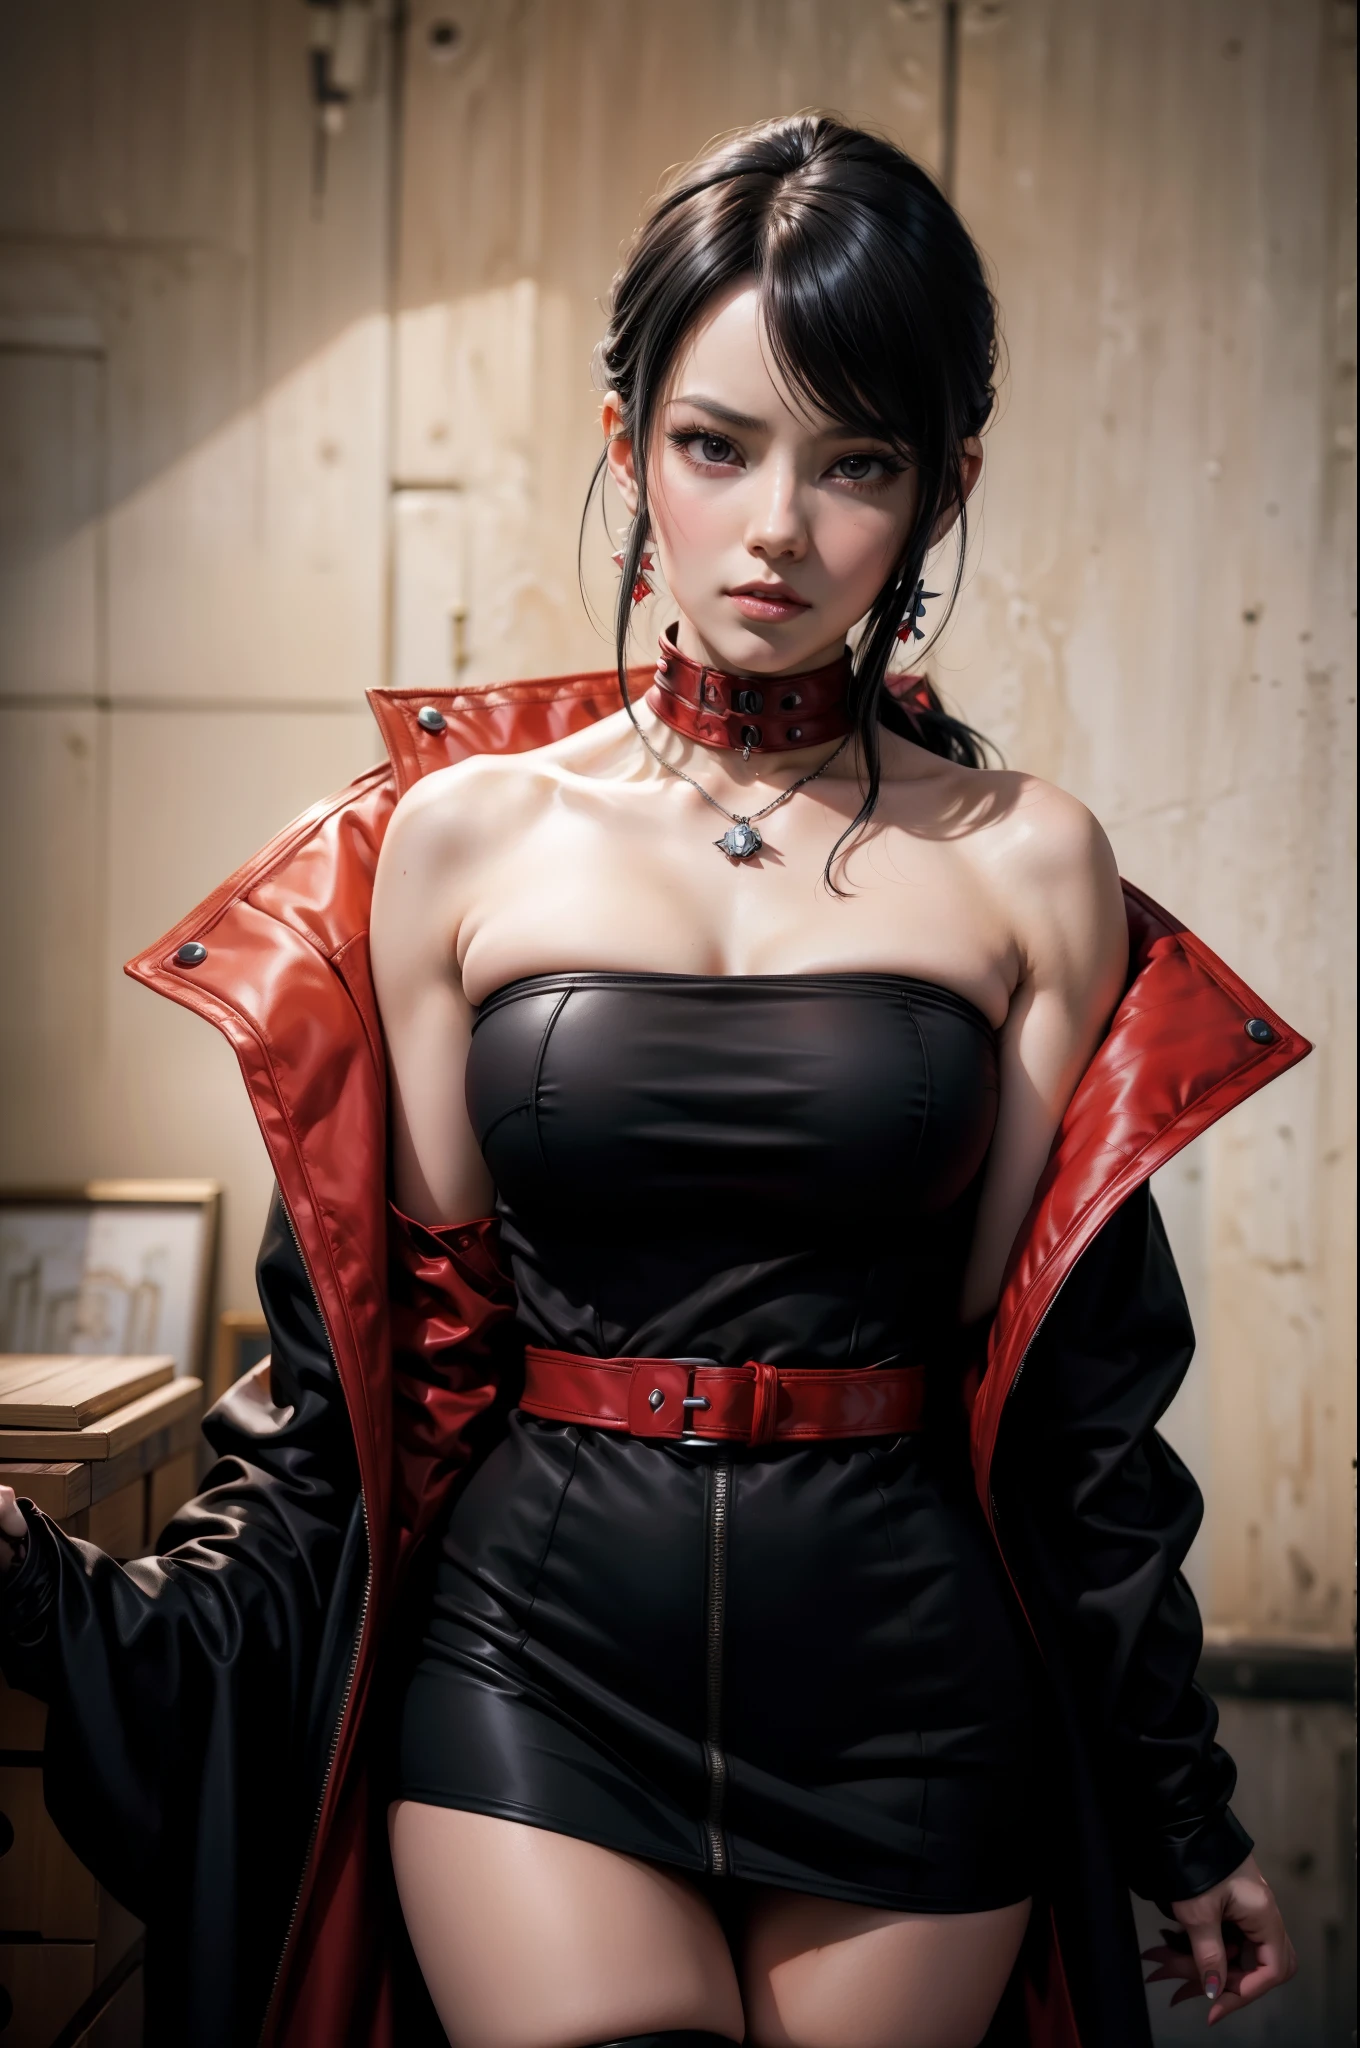 there is a woman in a black dress and red cape posing, range murata and artgerm, seductive tifa lockhart portrait, anime girl cosplay, anya from spy x family, portrait of tifa lockhart, yayoi kasuma, full-cosplay, professional cosplay, jett from valorant, hints of yayoi kasuma, anime cosplay